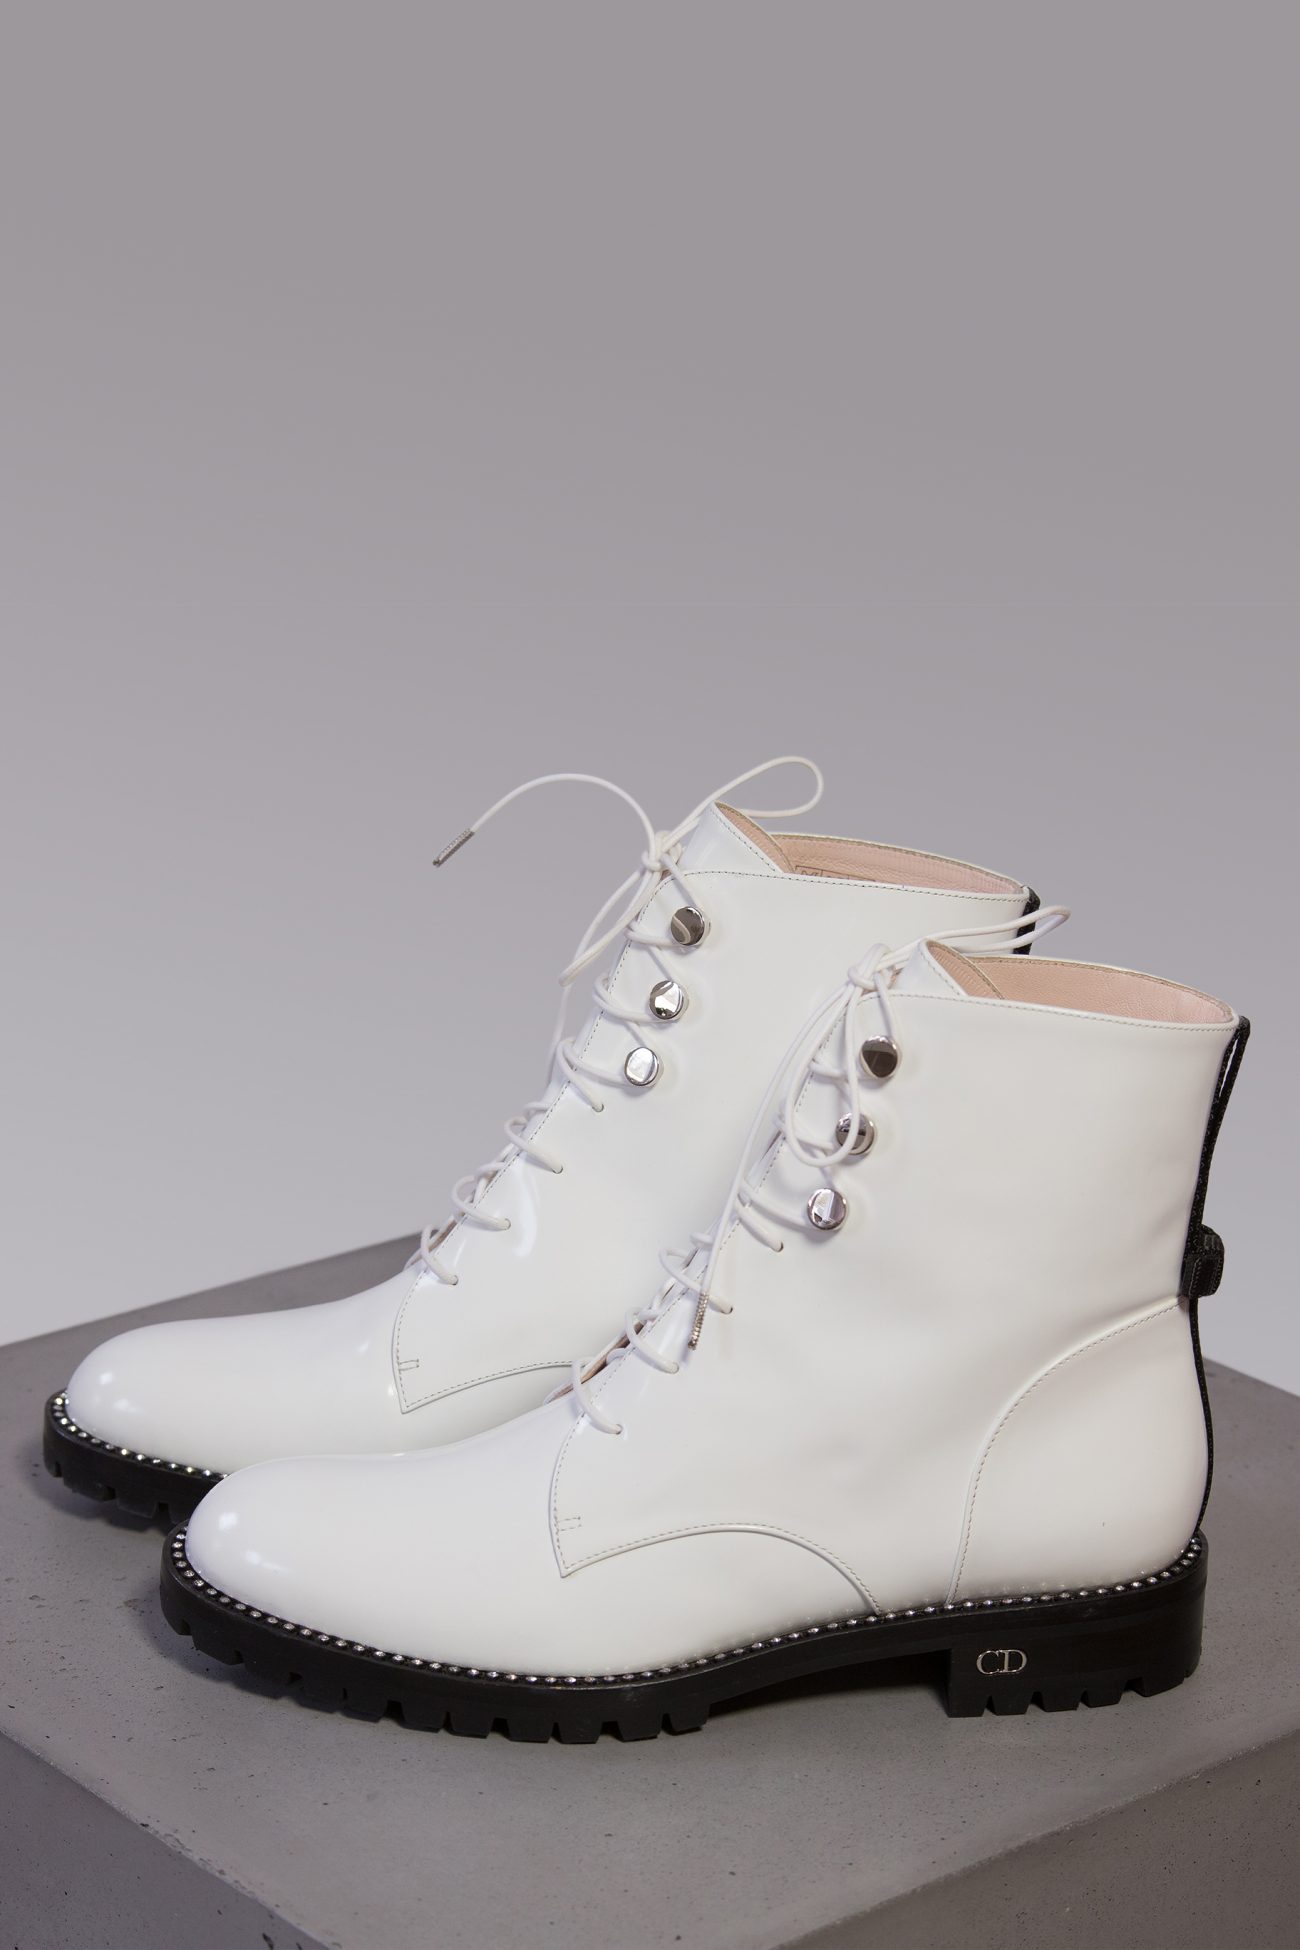 Dior Boots, 36.5 - Huntessa Luxury Online Consignment Boutique